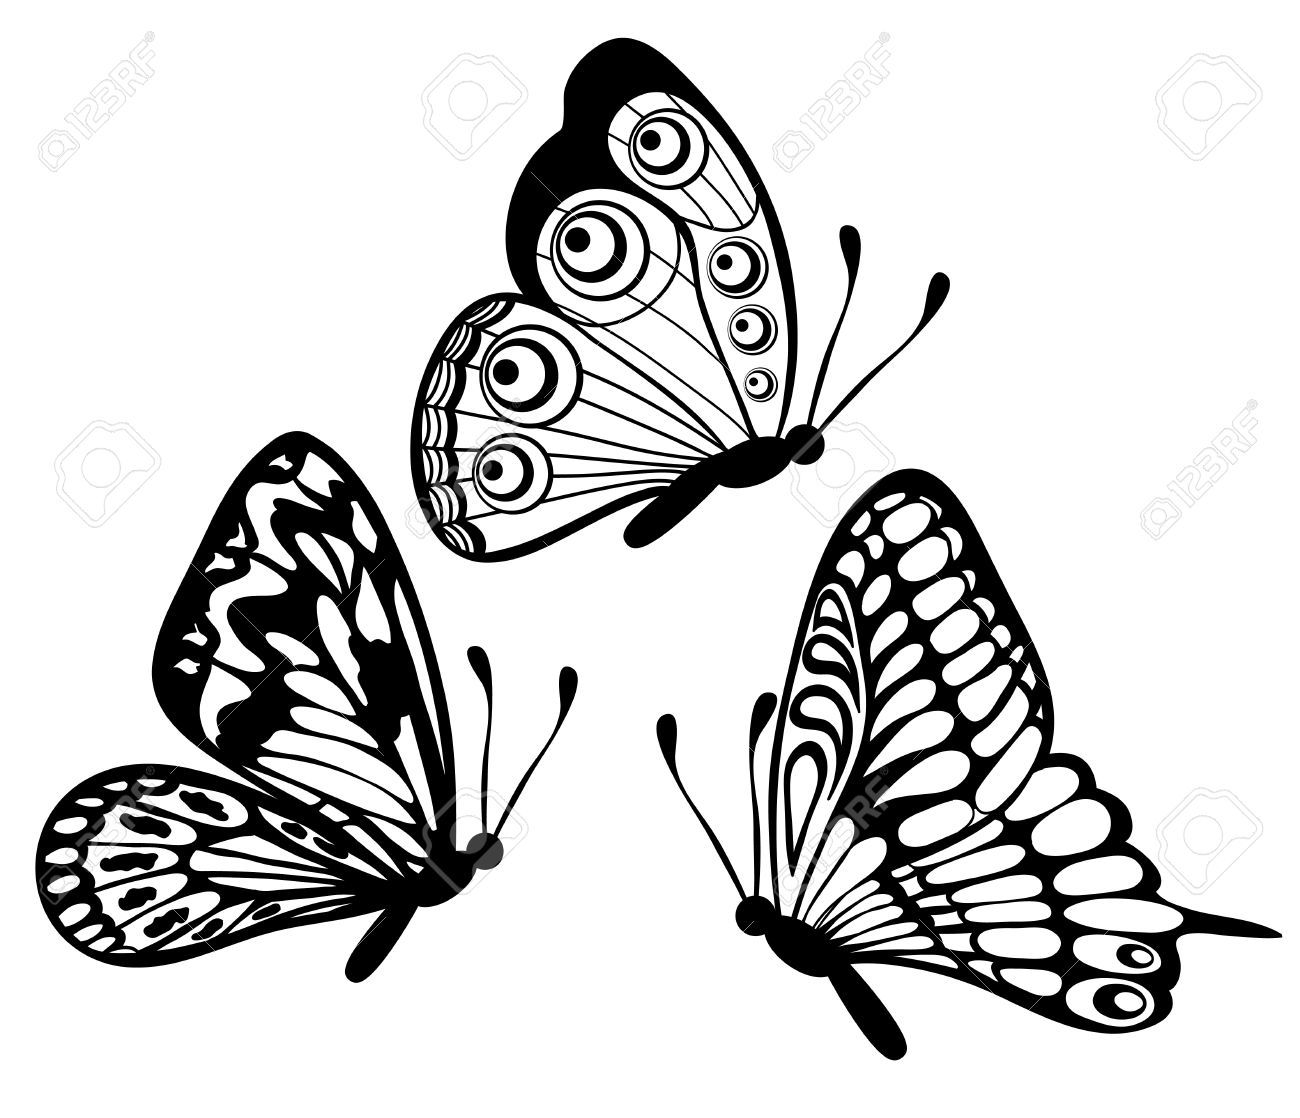 Butterfly flying clipart black and white